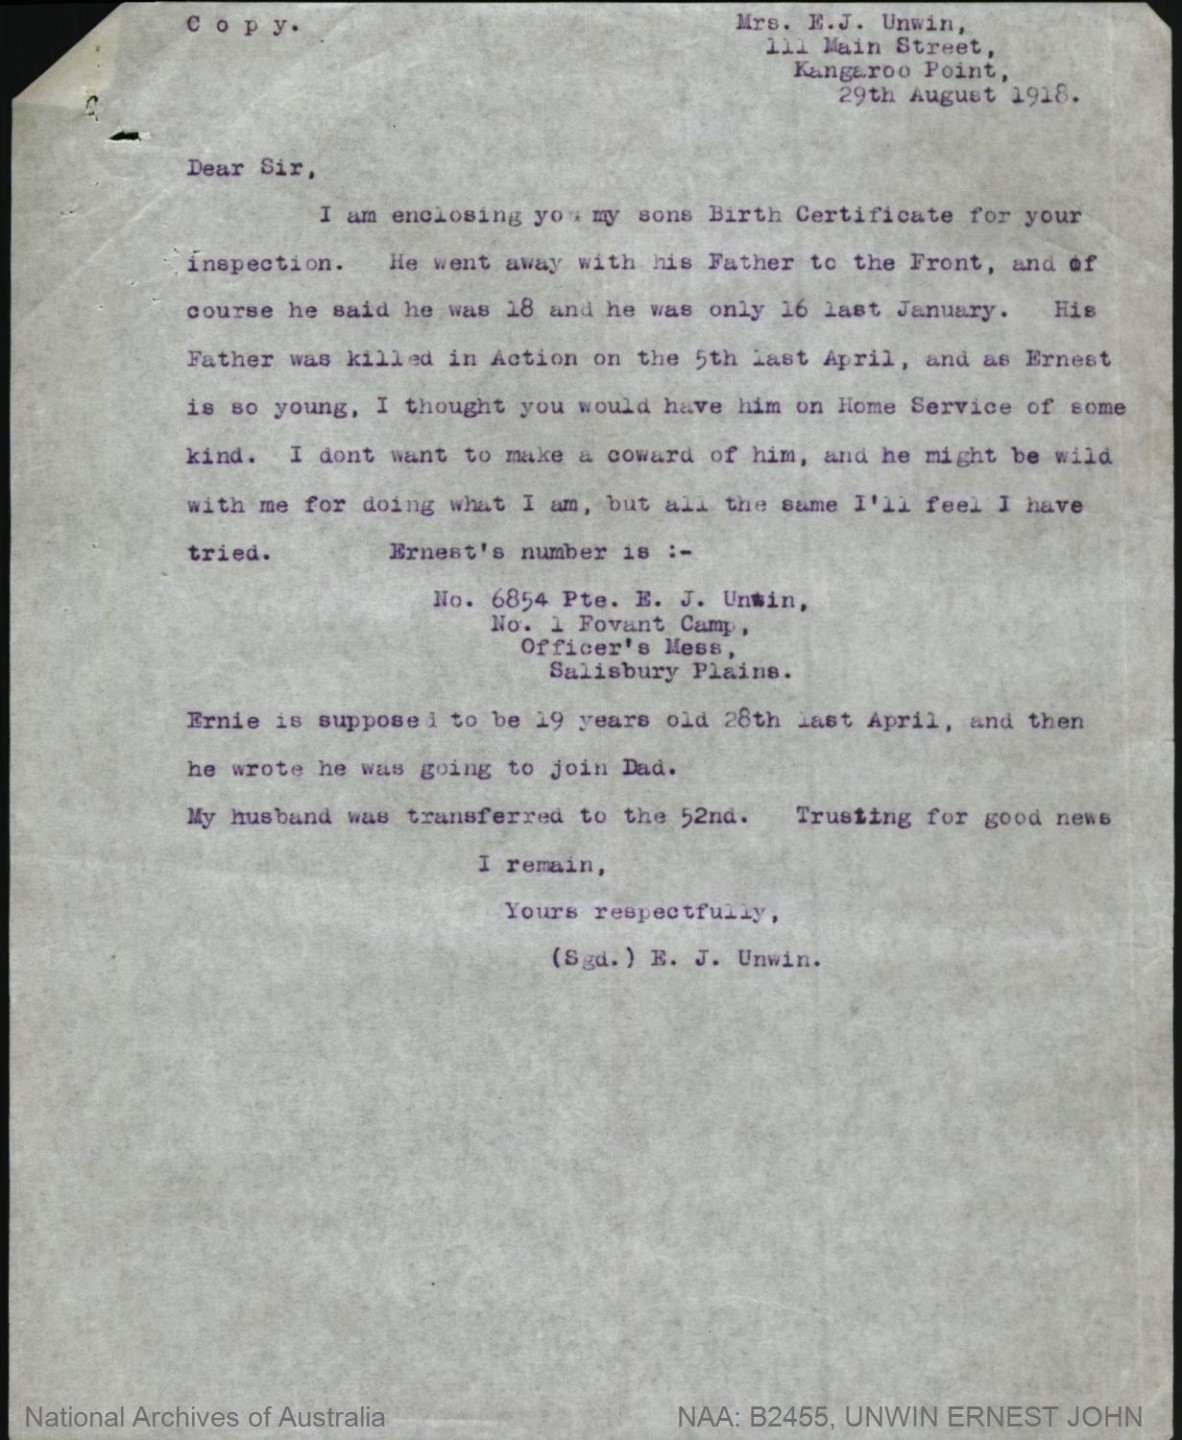 Letter written by Ernest Unwins mother Ellen Jane Unwin asking the Australian Army to bring home her son from the French battlefields during the First World War as he enlisted under aged